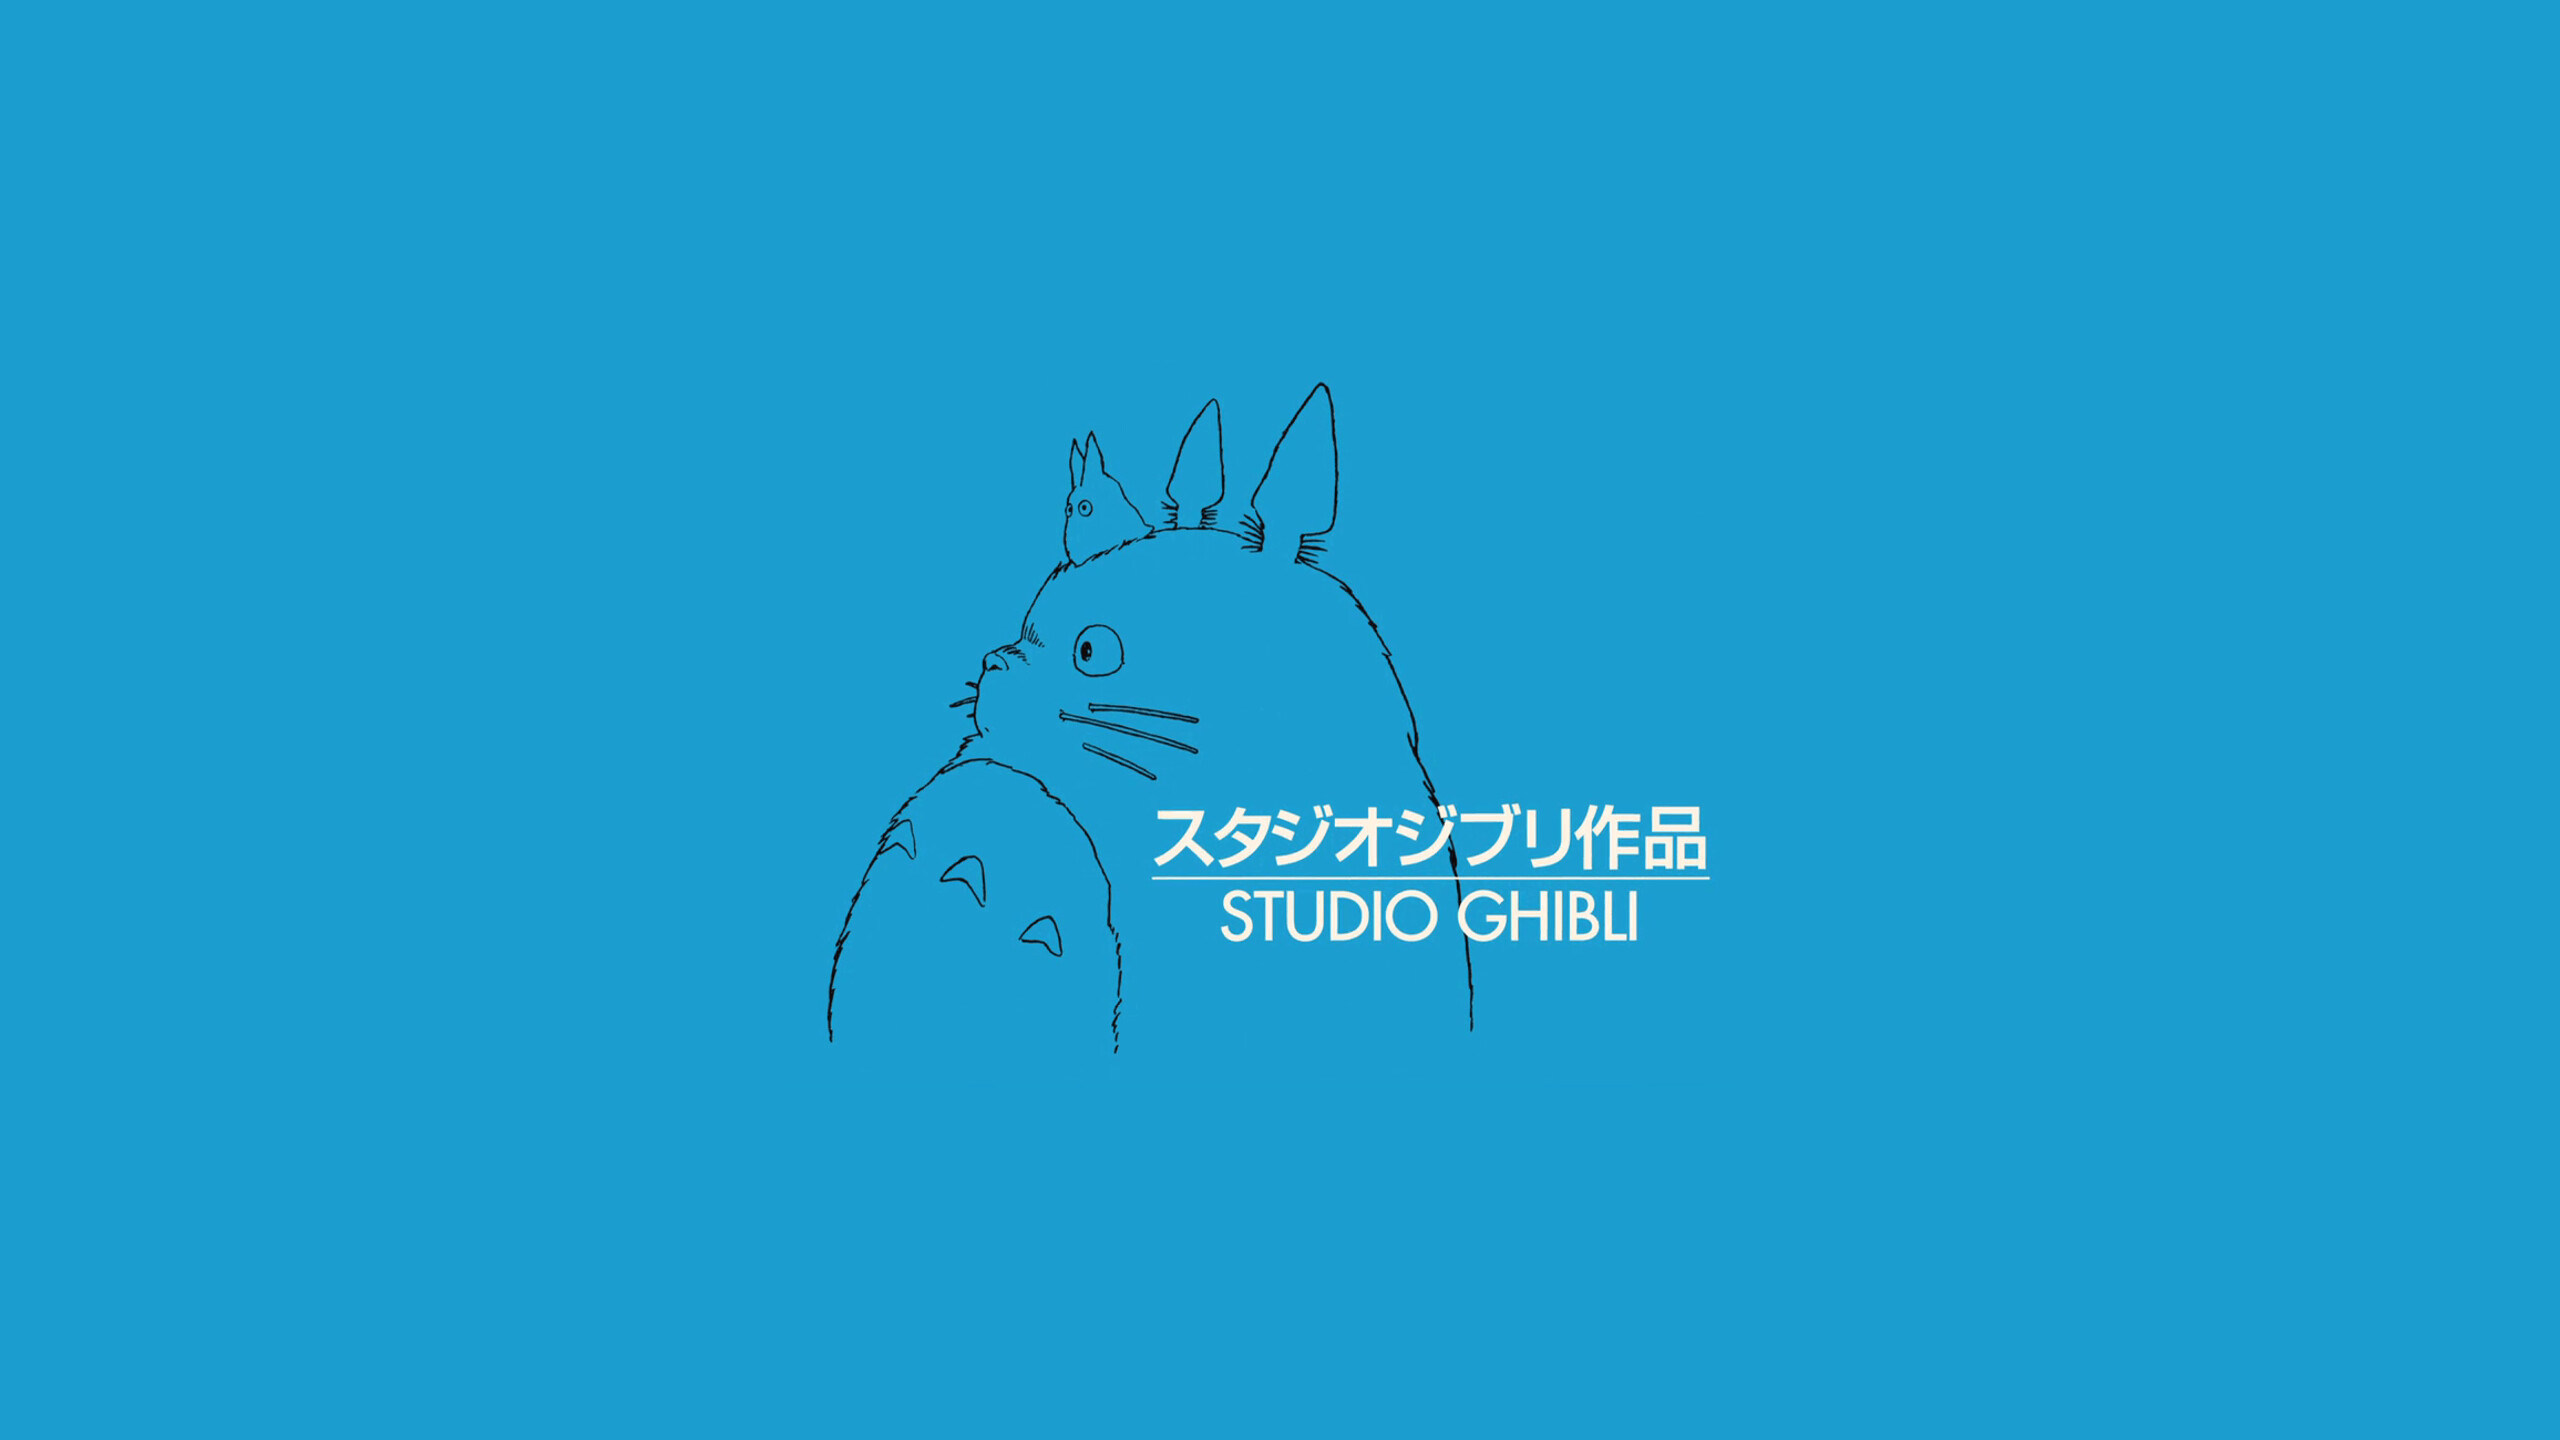 Studio Ghibli: The company's mascot and most recognizable symbol is a character named Totoro. 2560x1440 HD Background.